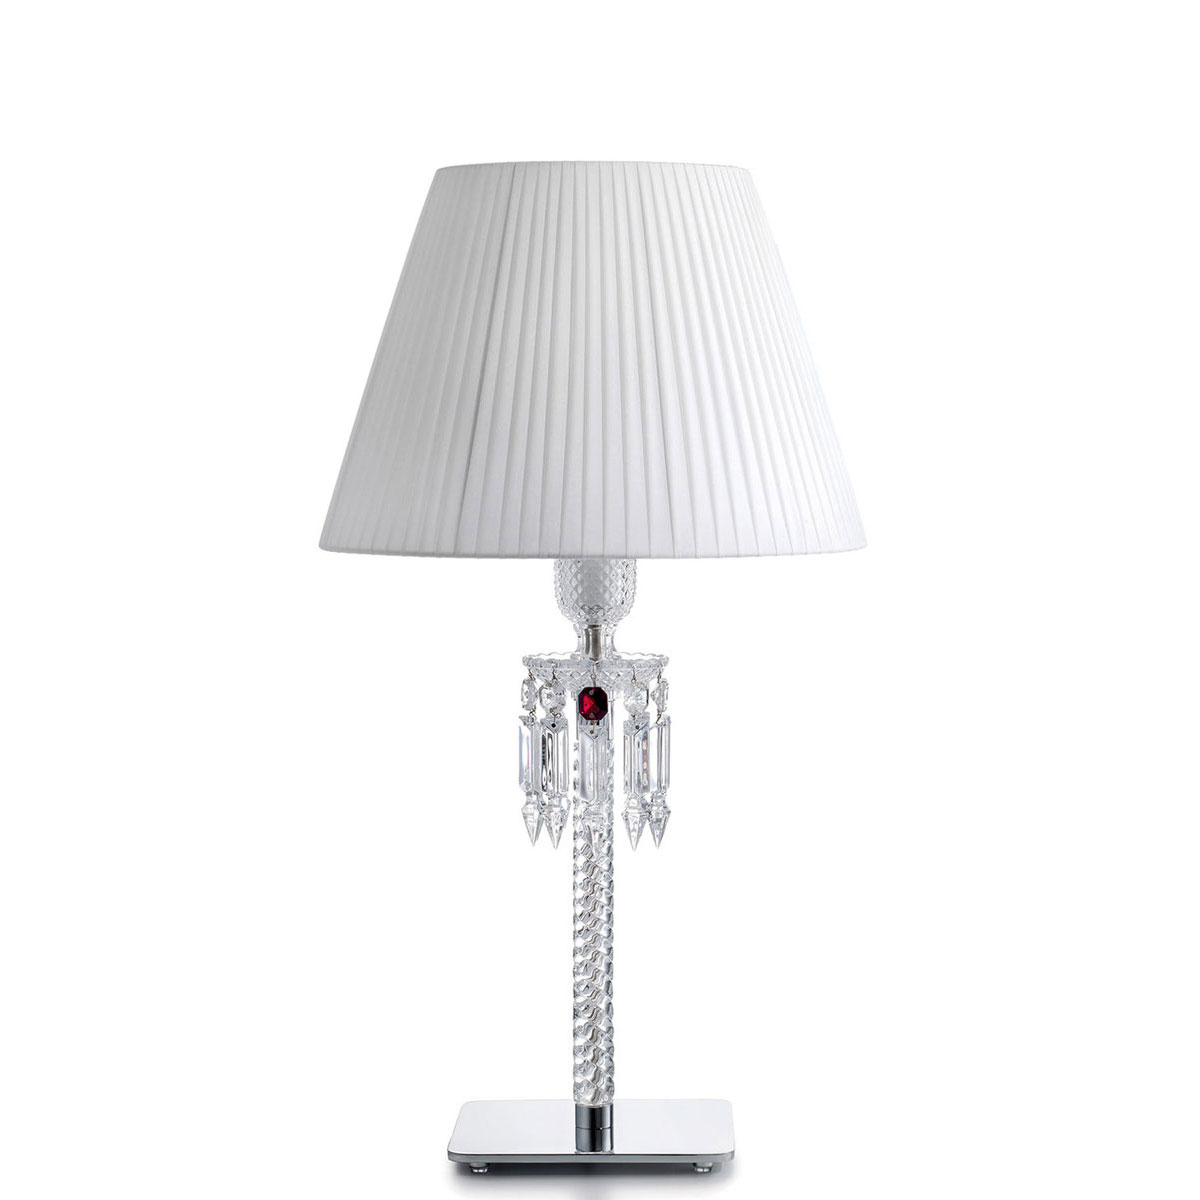 Baccarat Crystal, Torch Crystal Lamp With White Shade By Arik Levy